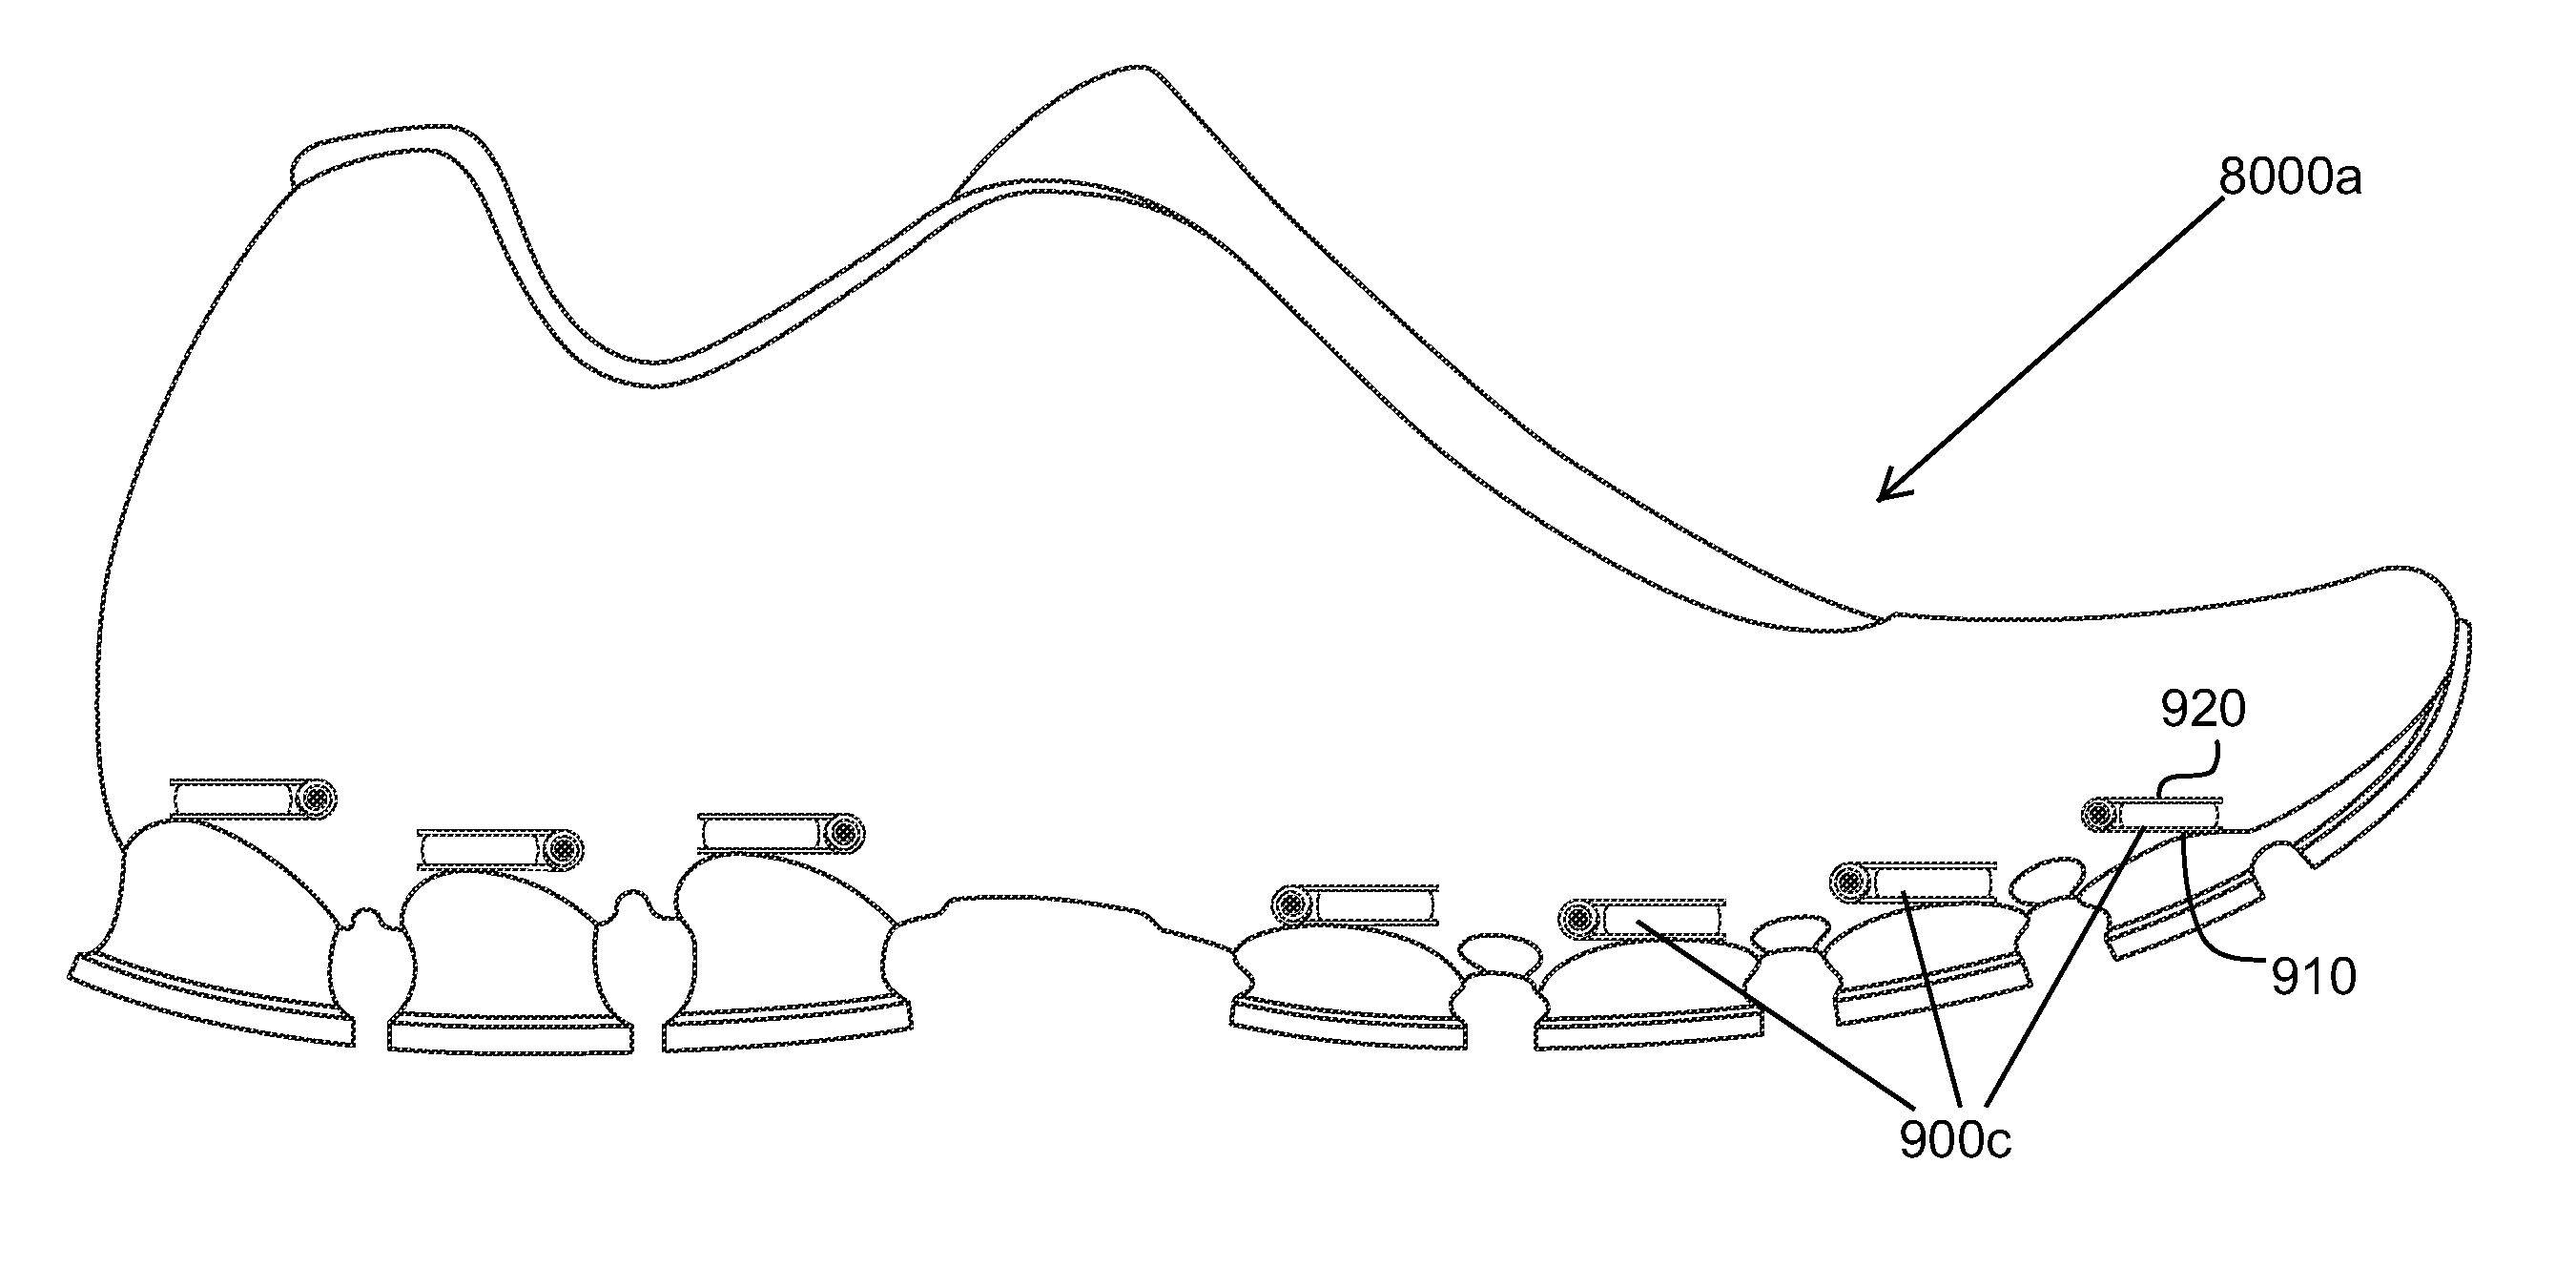 Shoes, devices for shoes, and methods of using shoes